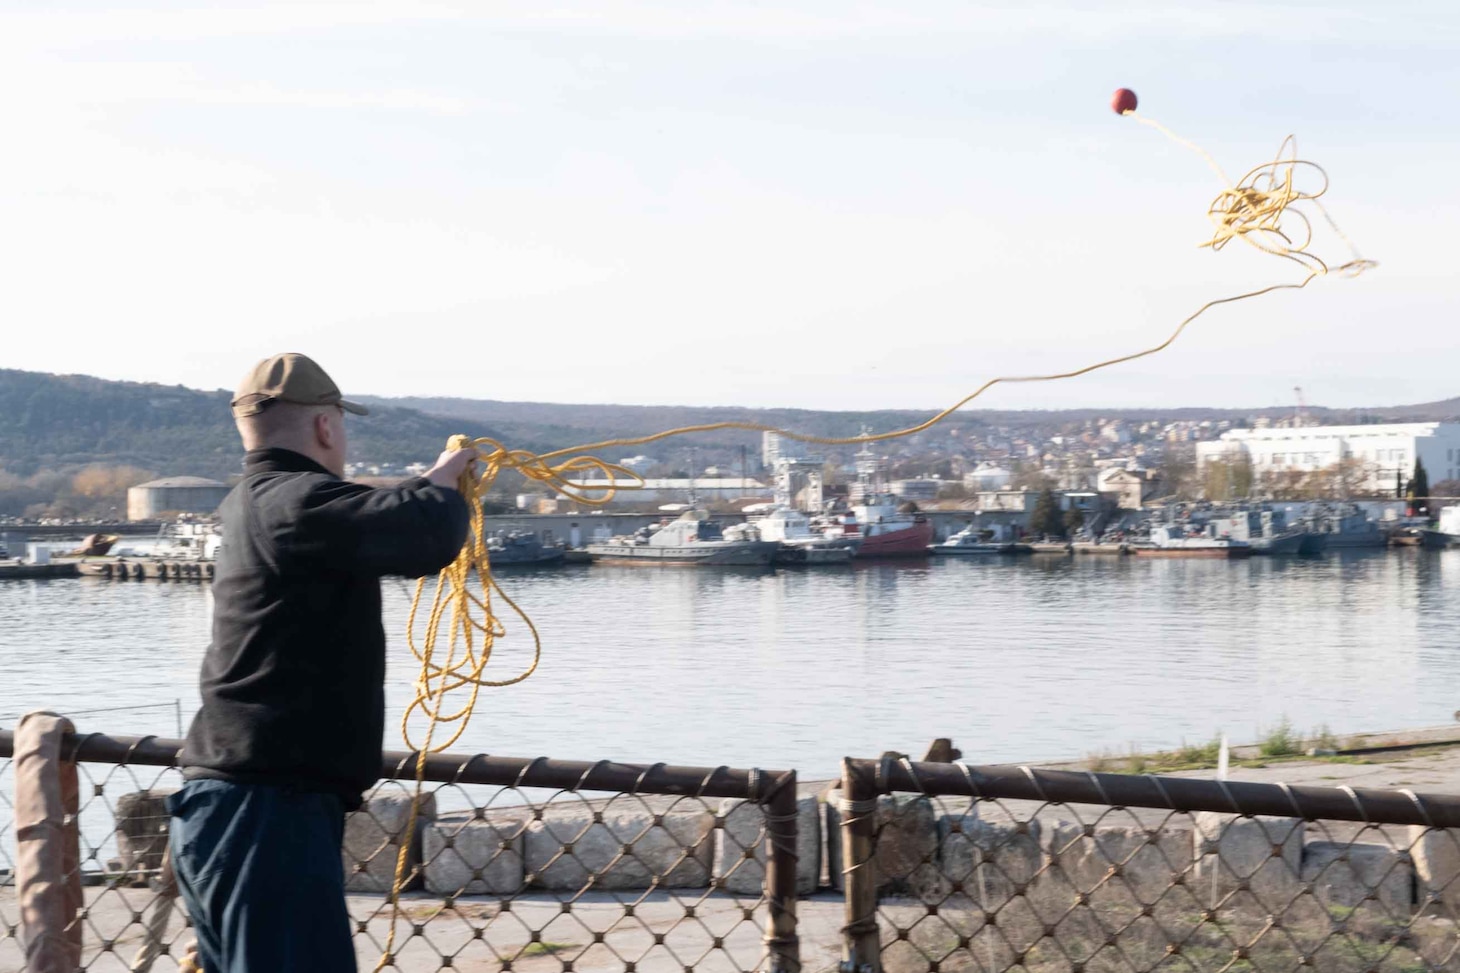 Fire Controlman (Aegis) 2nd Class Richard Shelley throws a line from the Arleigh Burke-class guided-missile destroyer USS Arleigh Burke (DDG 51) to the pier while mooring in Varna, Bulgaria, Nov. 26, 2021. Arleigh Burke, forward-deployed to Rota, Spain, is on its first patrol in the U.S. Sixth Fleet area of operations in support of U.S. National Security Interests and regional allies and partners.